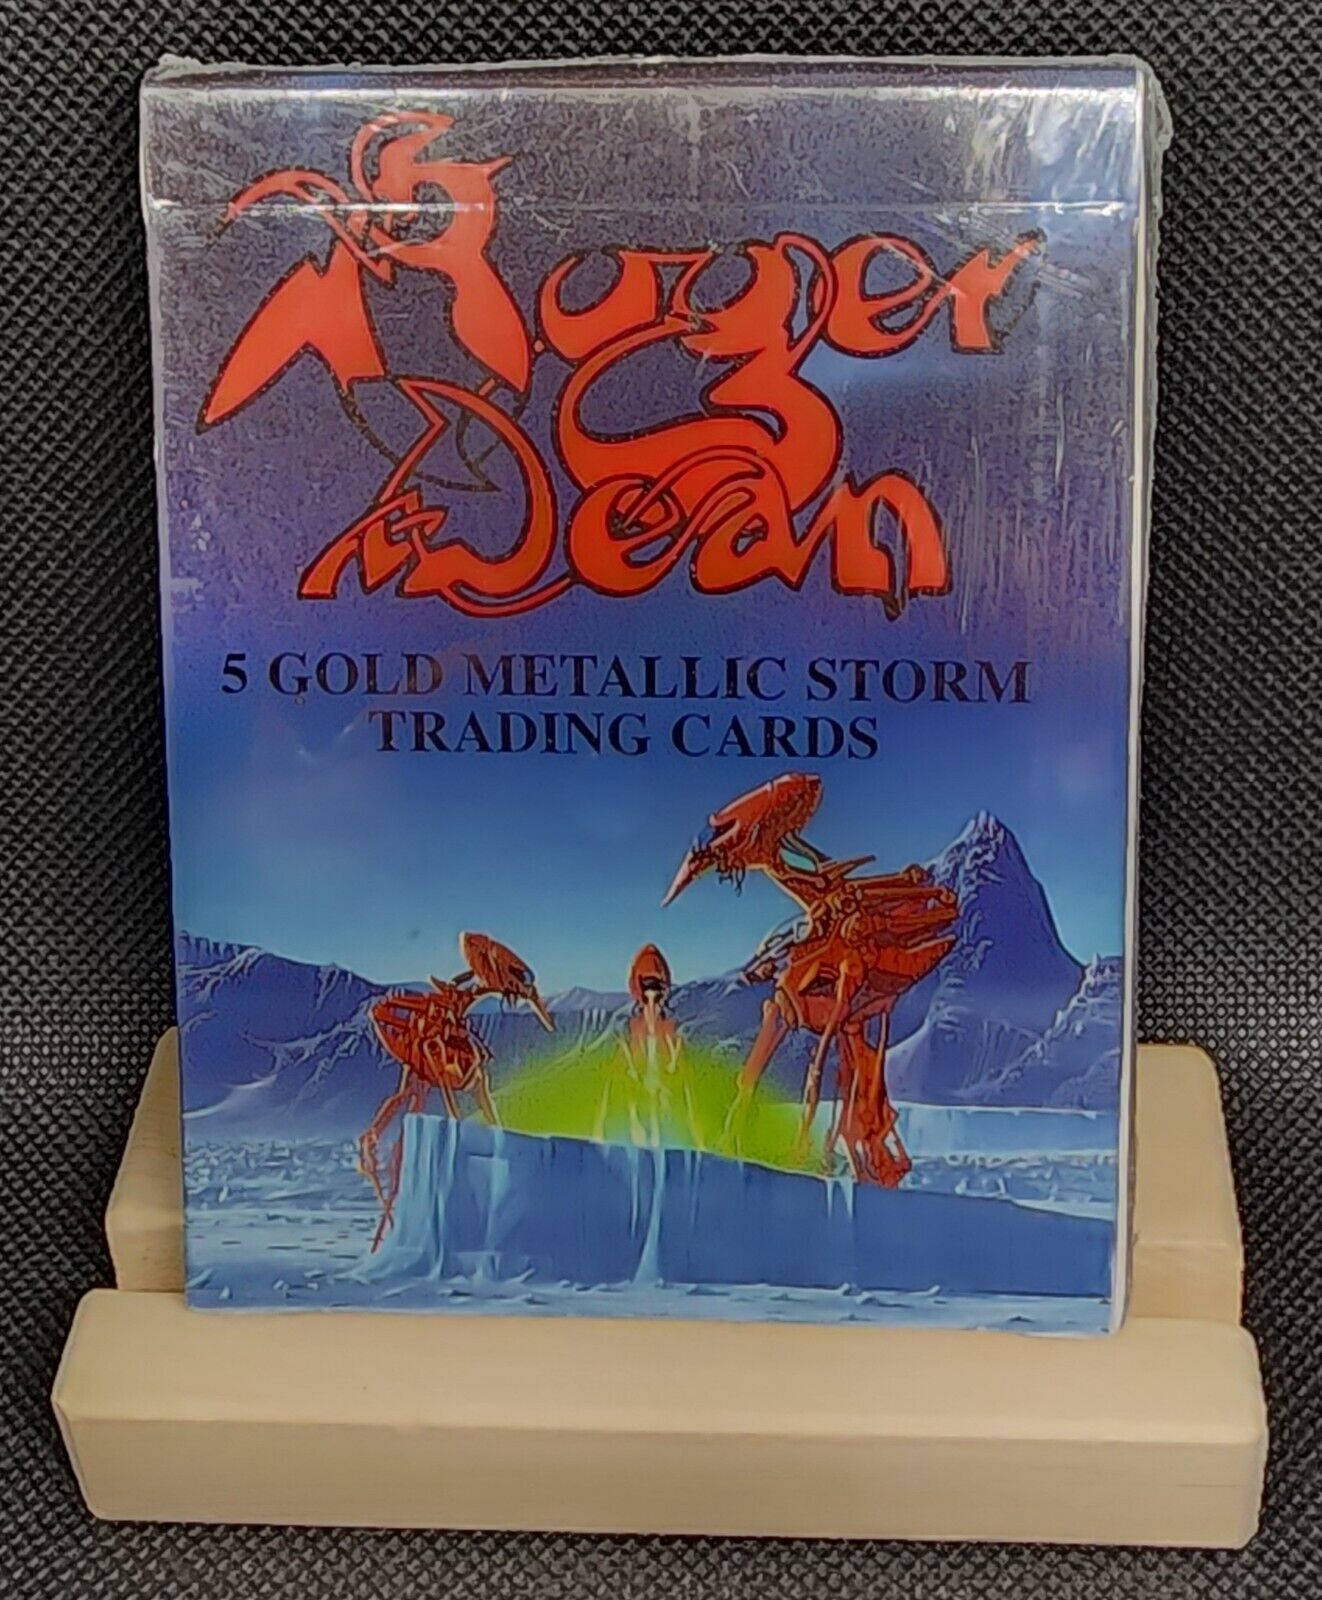 1993 Roger Dean Card Gold Metallic Storm Subset FPG Cards Factory Sealed